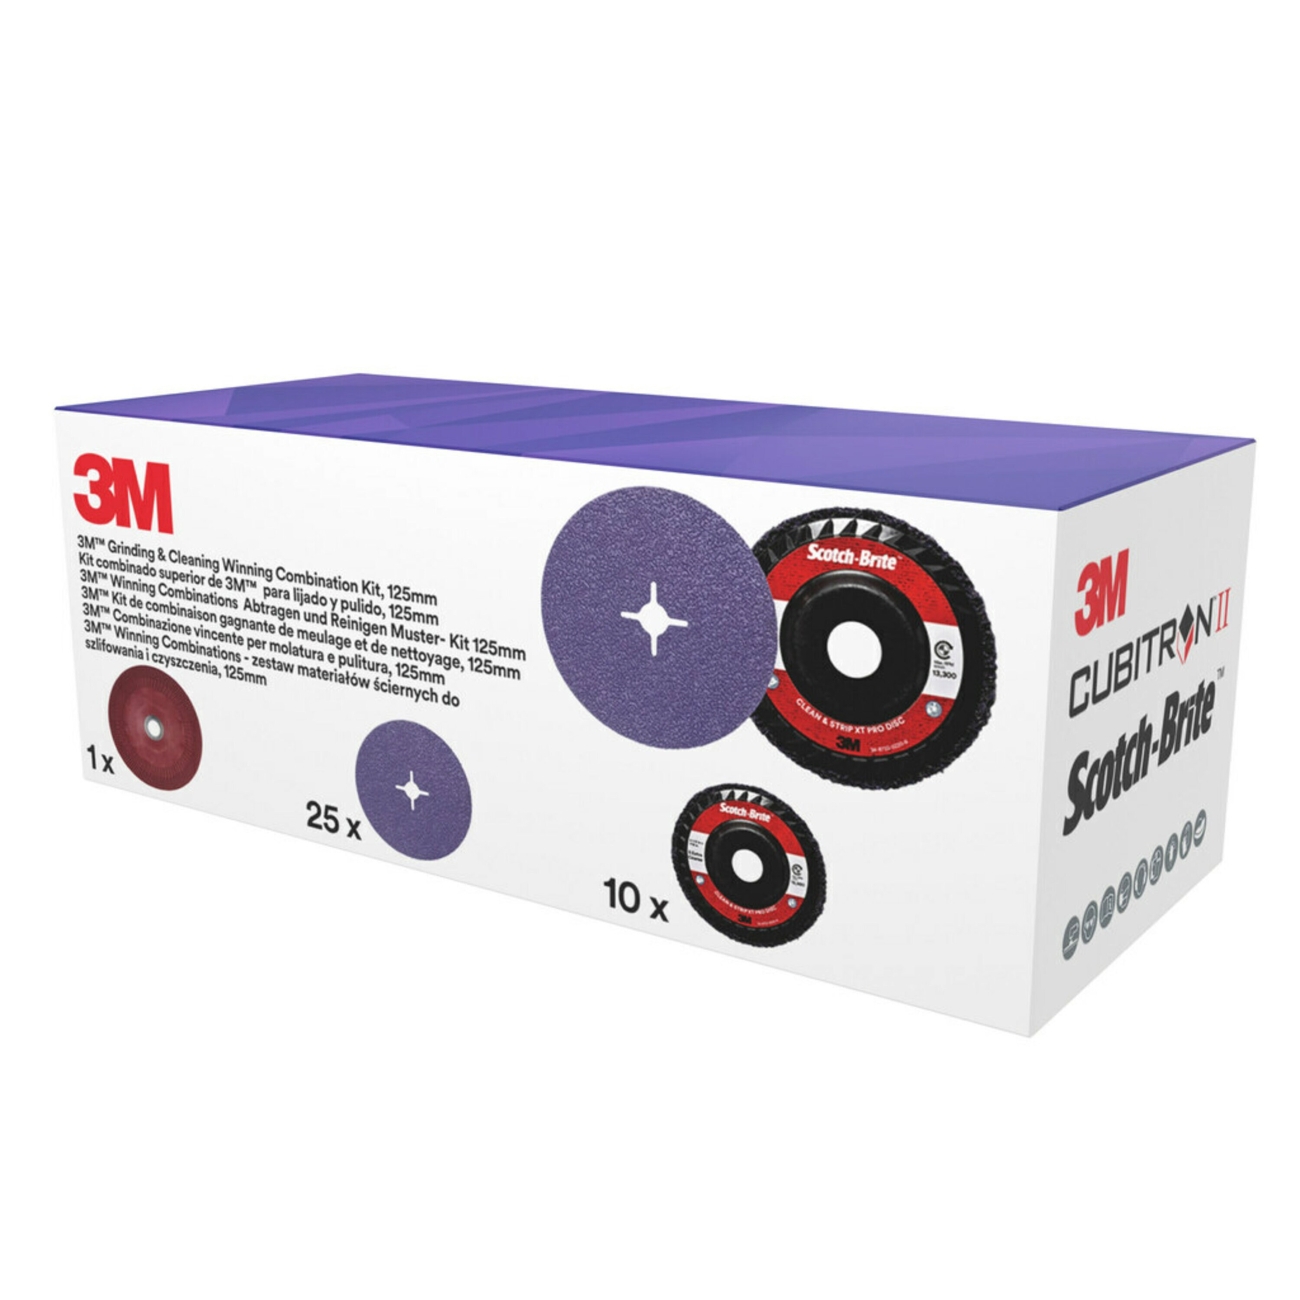 3M Sanding and cleaning set, 25x 125 mm 3M Cubitron II fibre disc 982CX P36+ and 10x 3M Scotch-Brite Clean and Strip XT Pro S coarse cleaning disc 125 mm , with 1x high-performance fibre disc backing pad